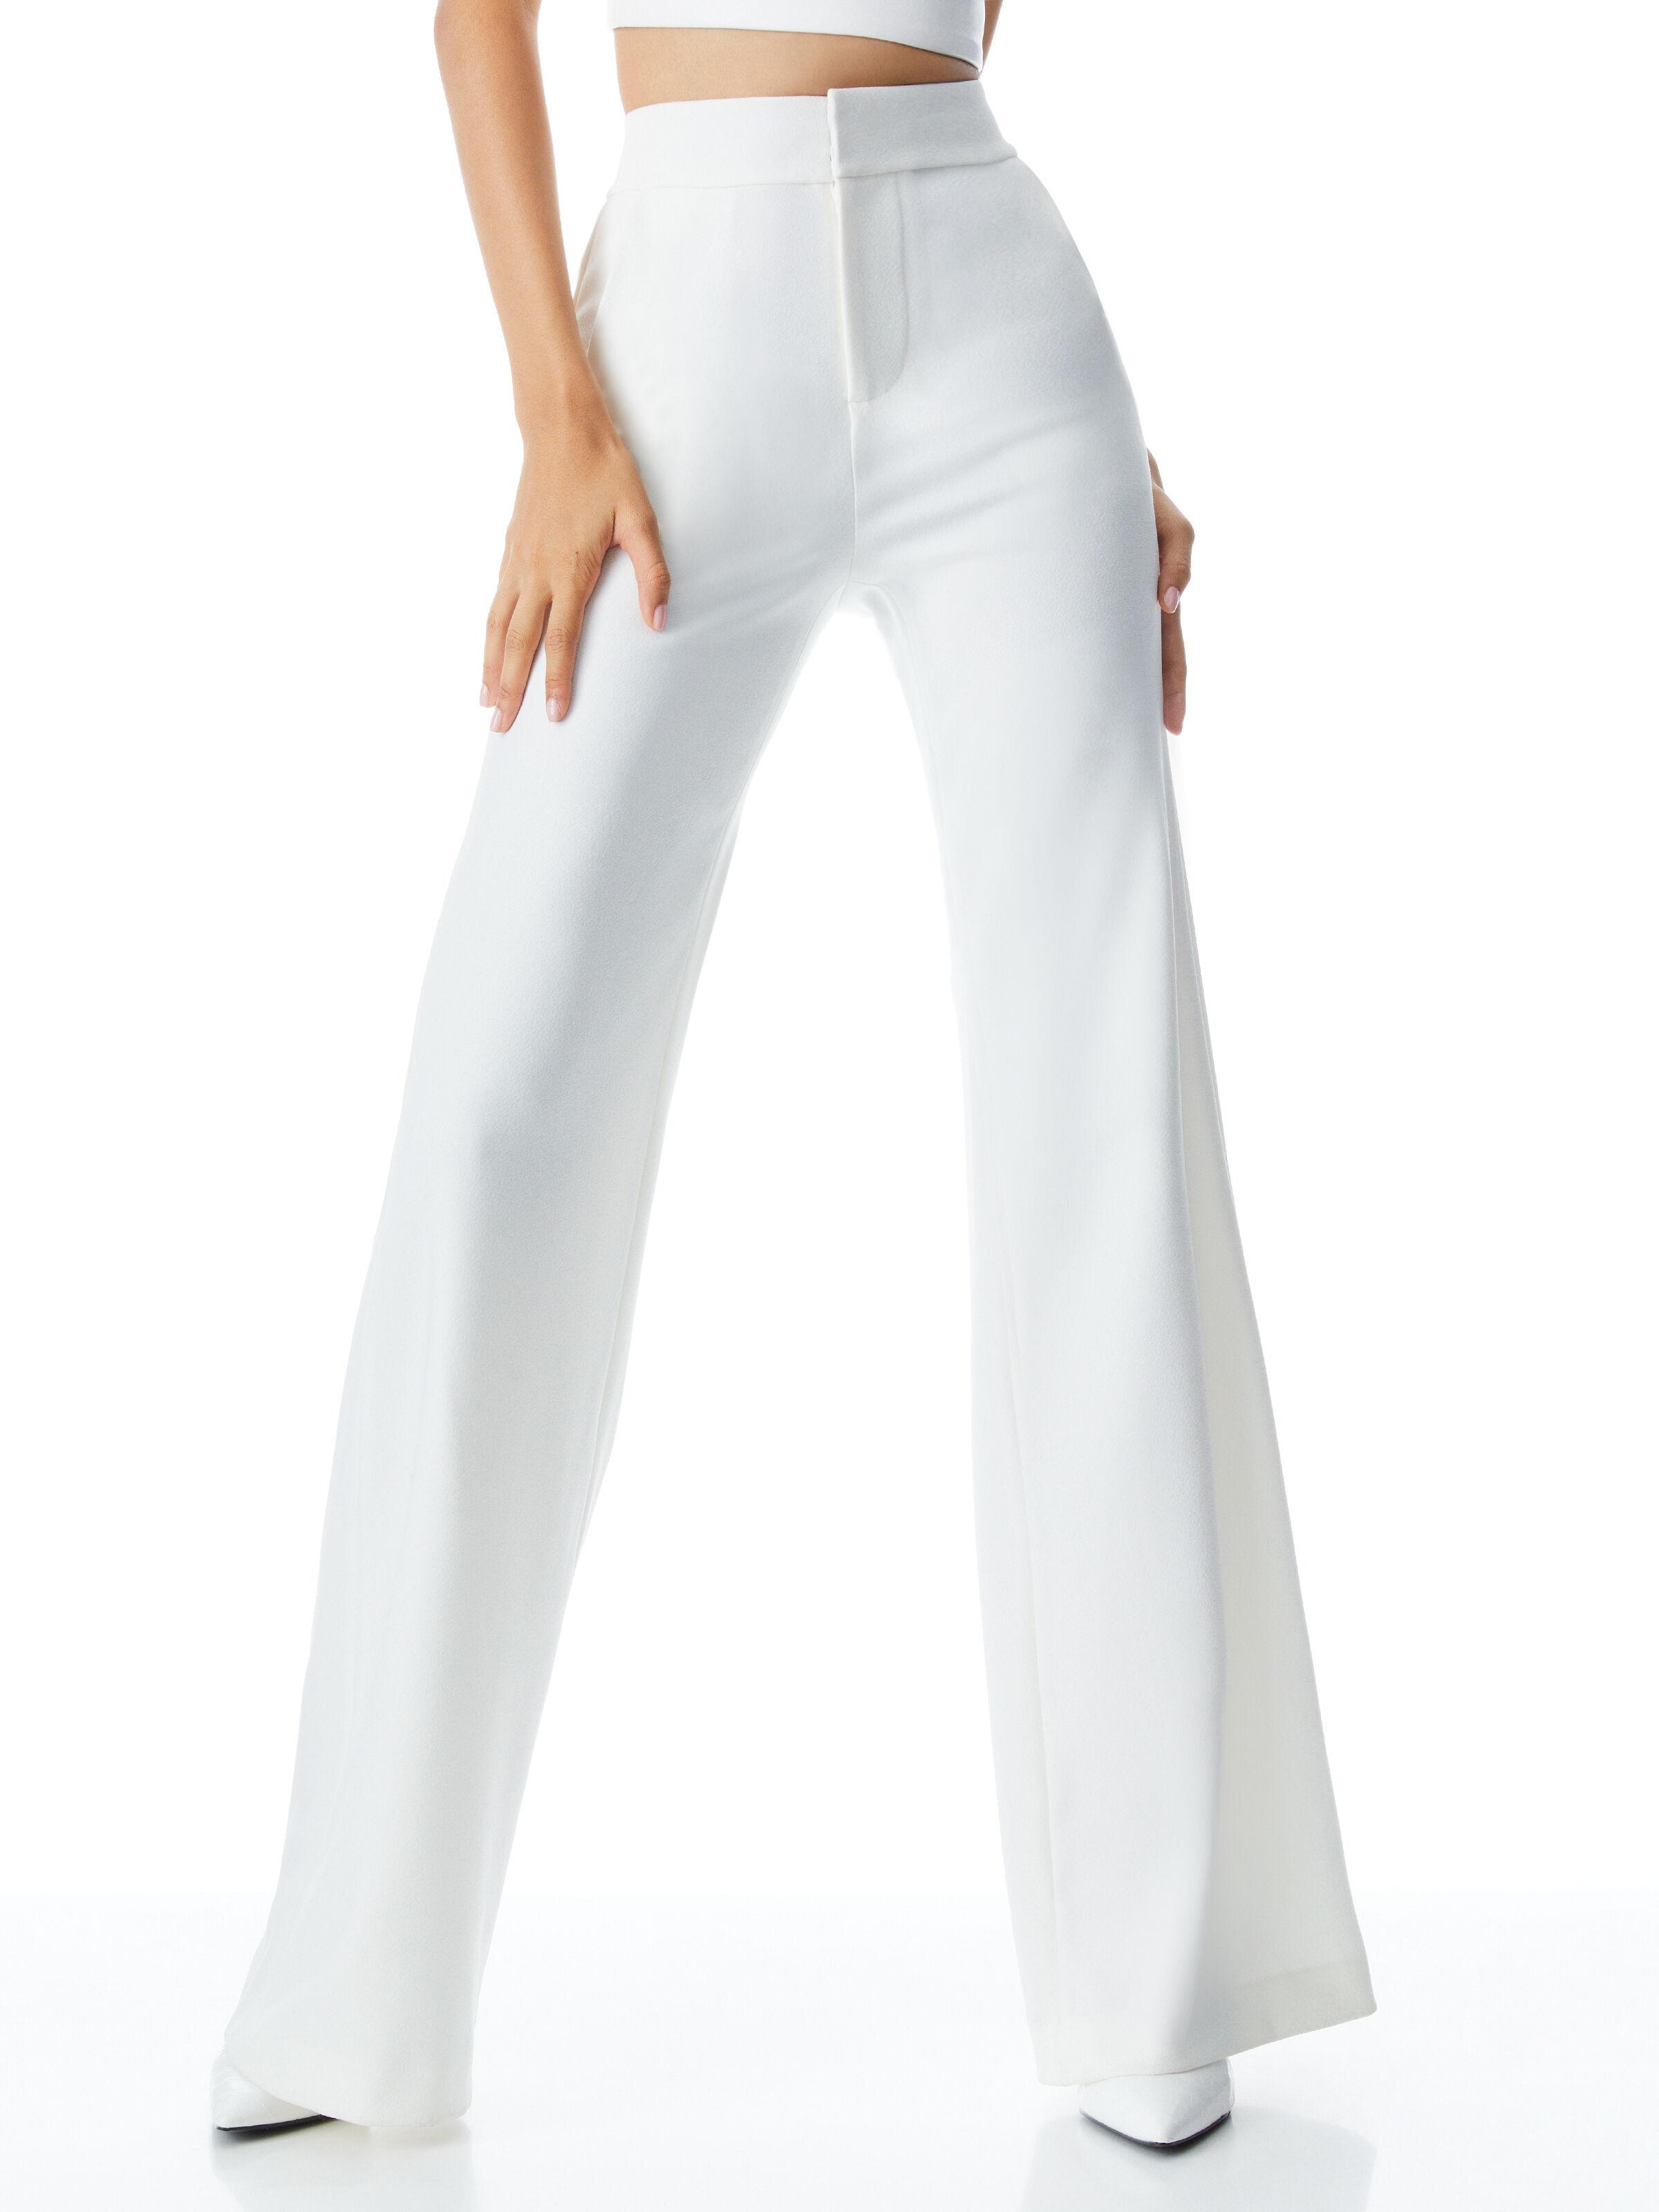 Alice + Olivia Alice + Olivia Deanna High Waisted Bootcut Pant in